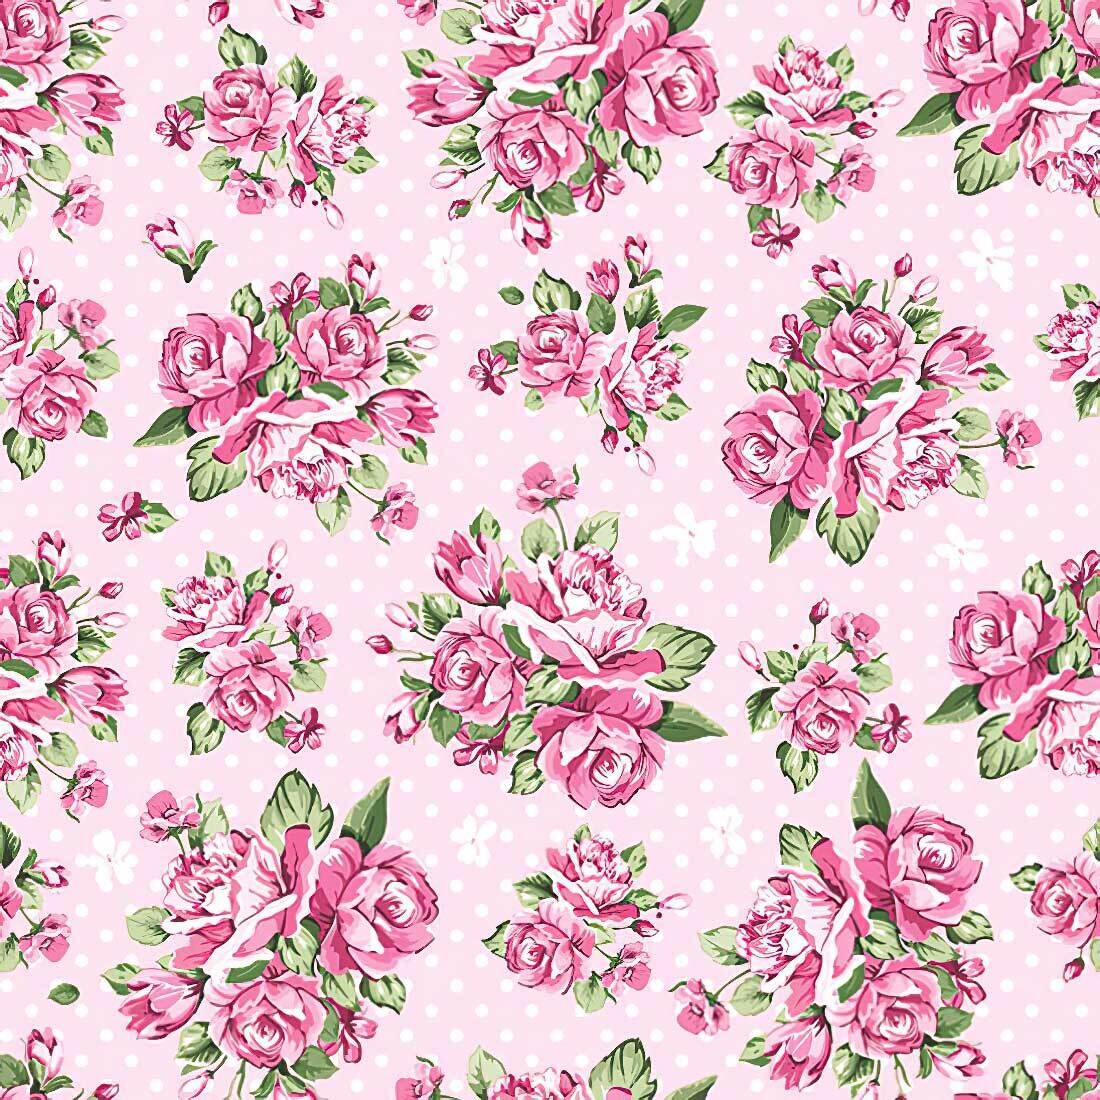 Decoupage Paper Napkins - Floral - Rose on Light Pink Background (1 Sheet) Out of Stock